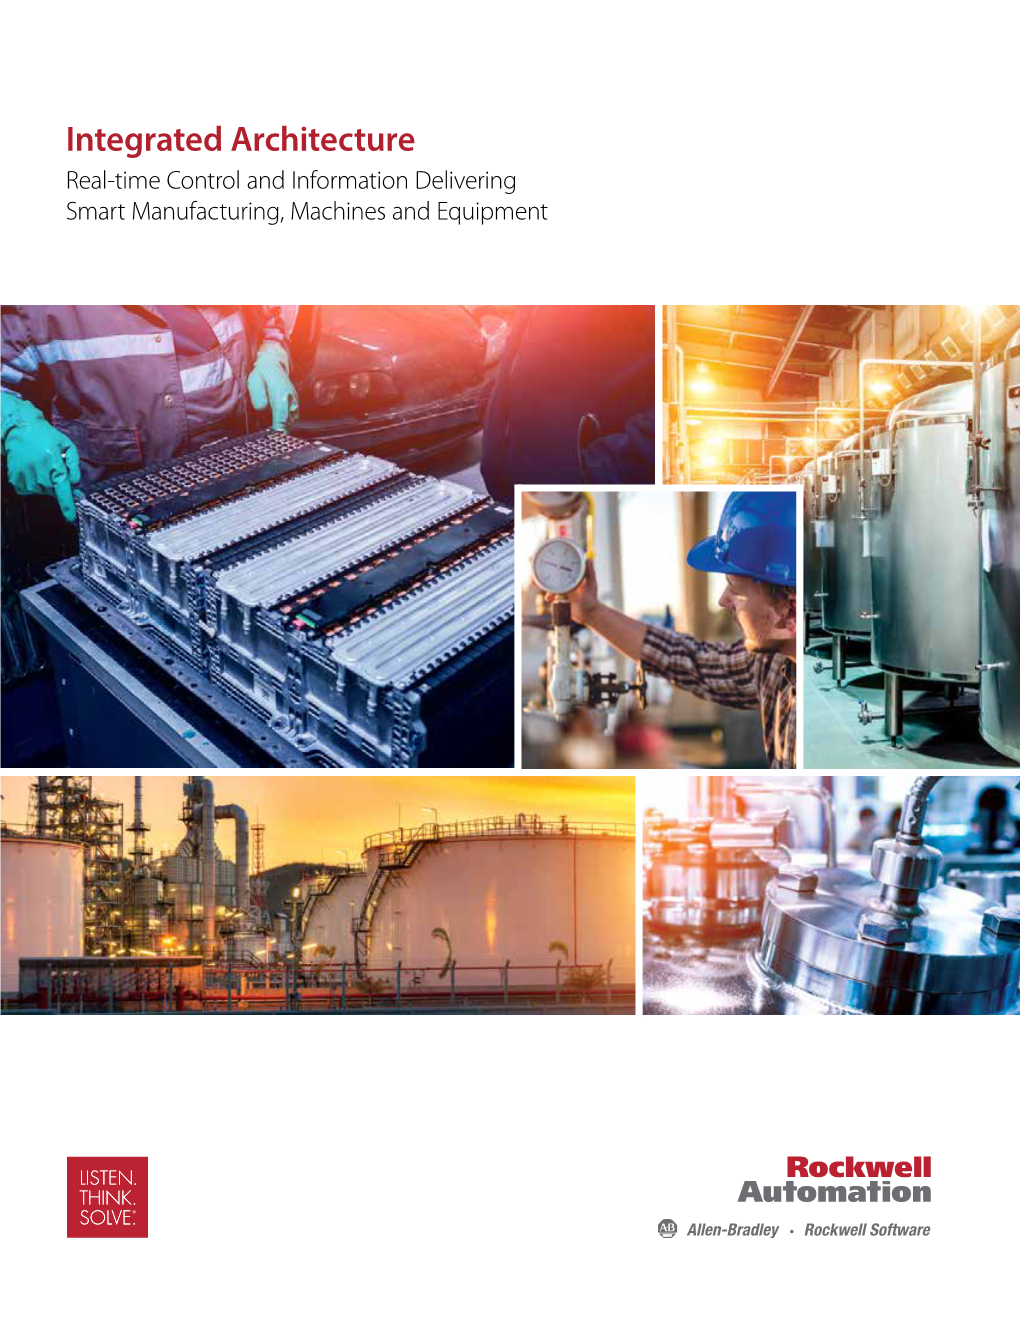 Integrated Architecture Real-Time Control and Information Delivering Smart Manufacturing, Machines and Equipment DELIVERING the CONNECTED ENTERPRISE